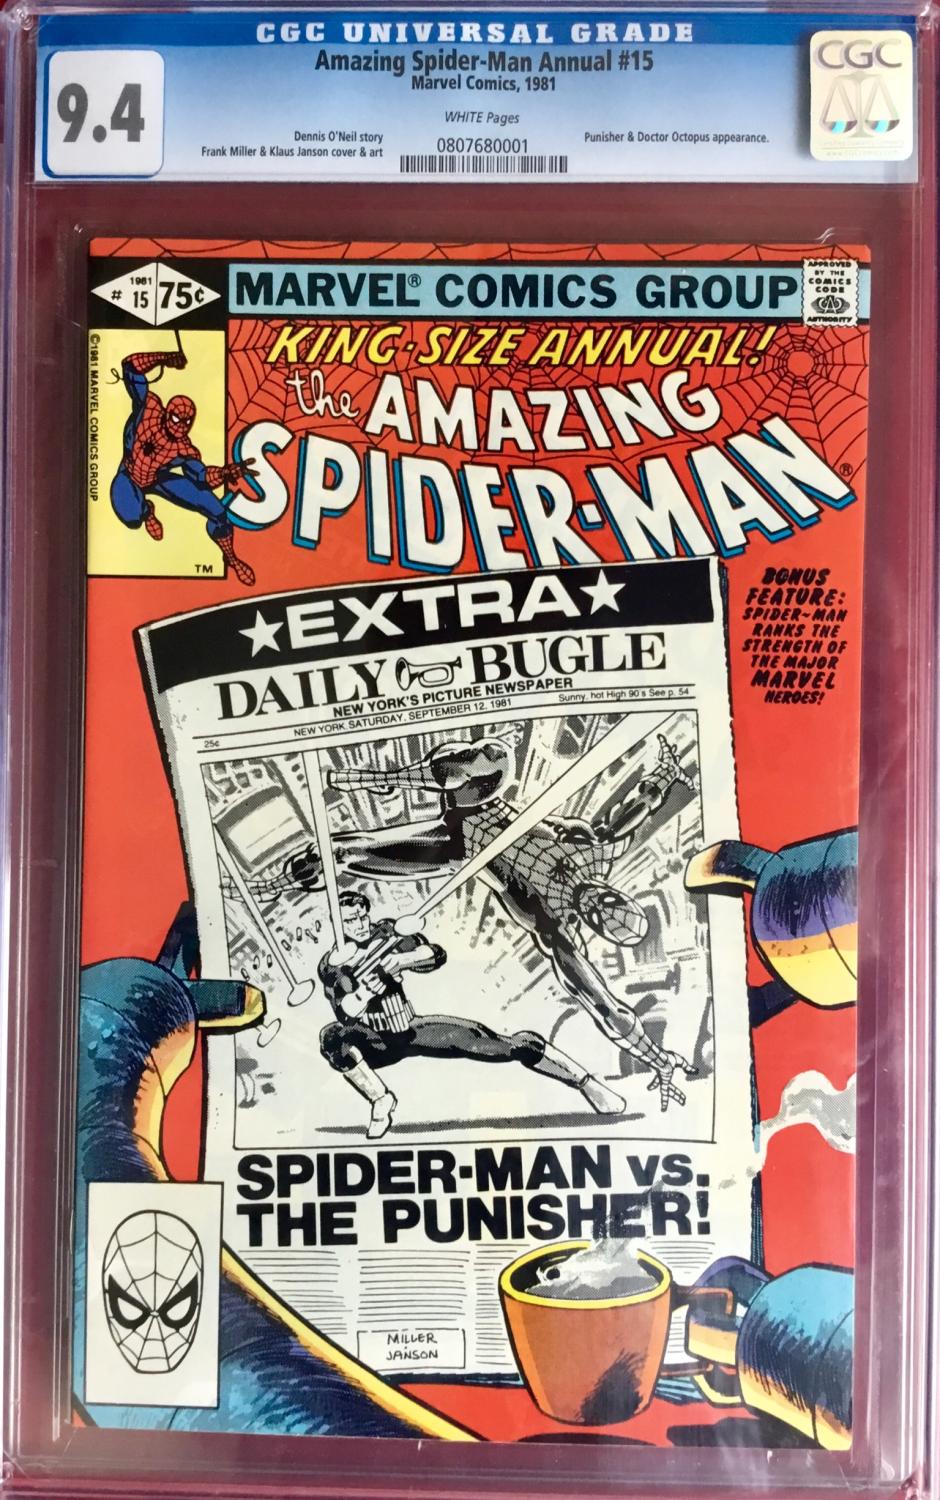 The AMAZING SPIDER-MAN ANNUAL No. 15 (1981) - CGC Graded 9.4 (NM) by O ...